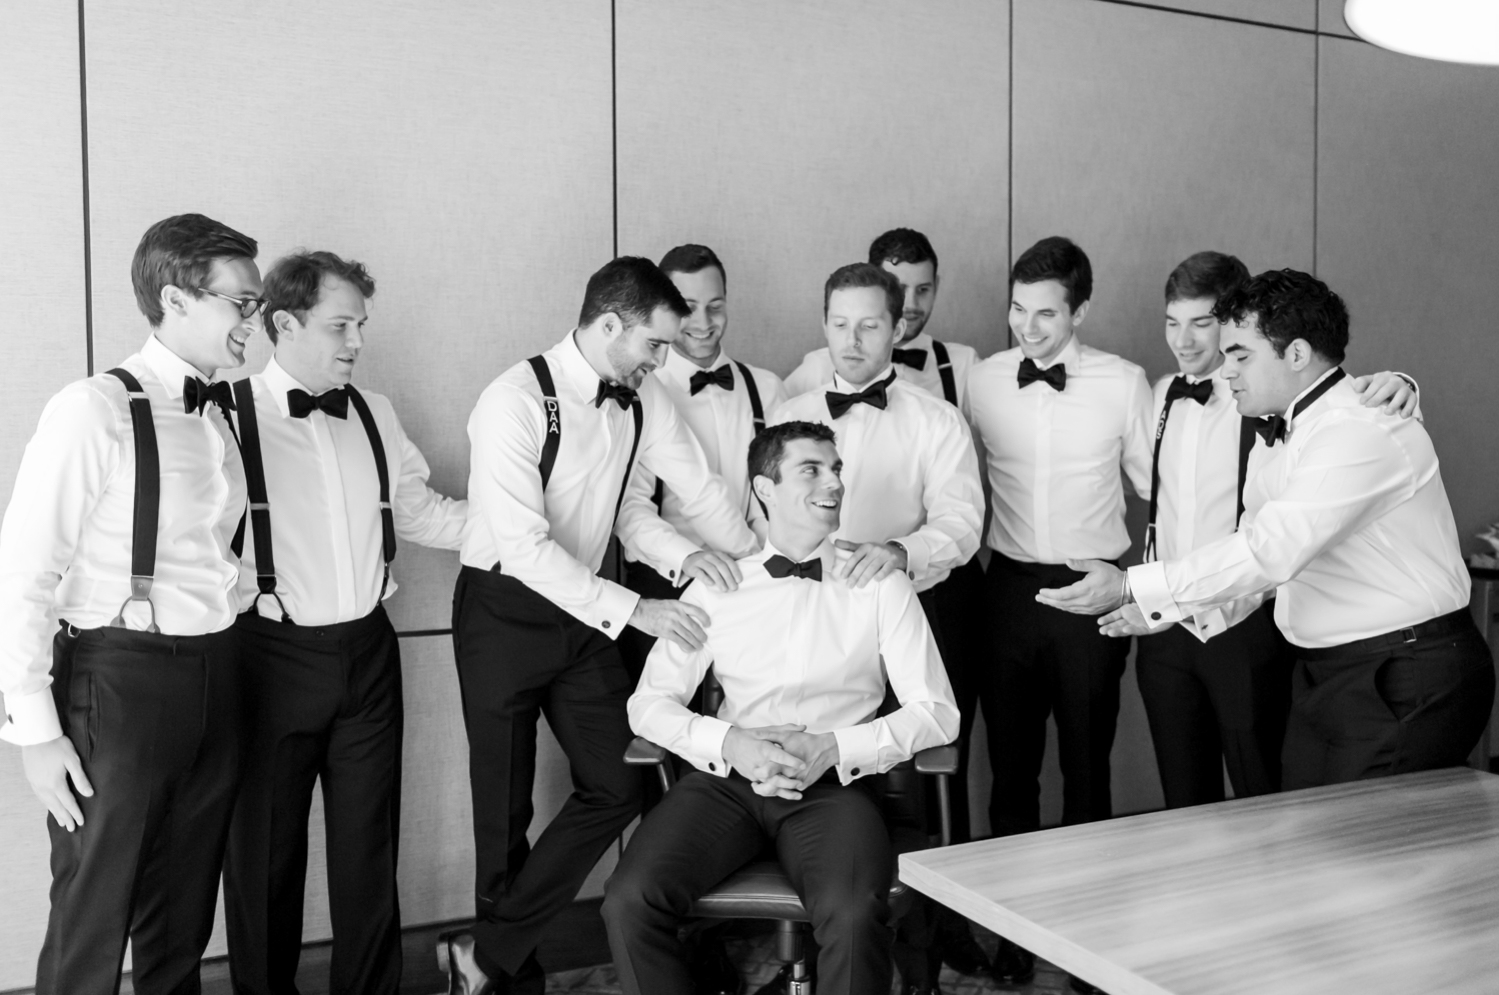 Groomsmen stand behind and around the groom and hype him up